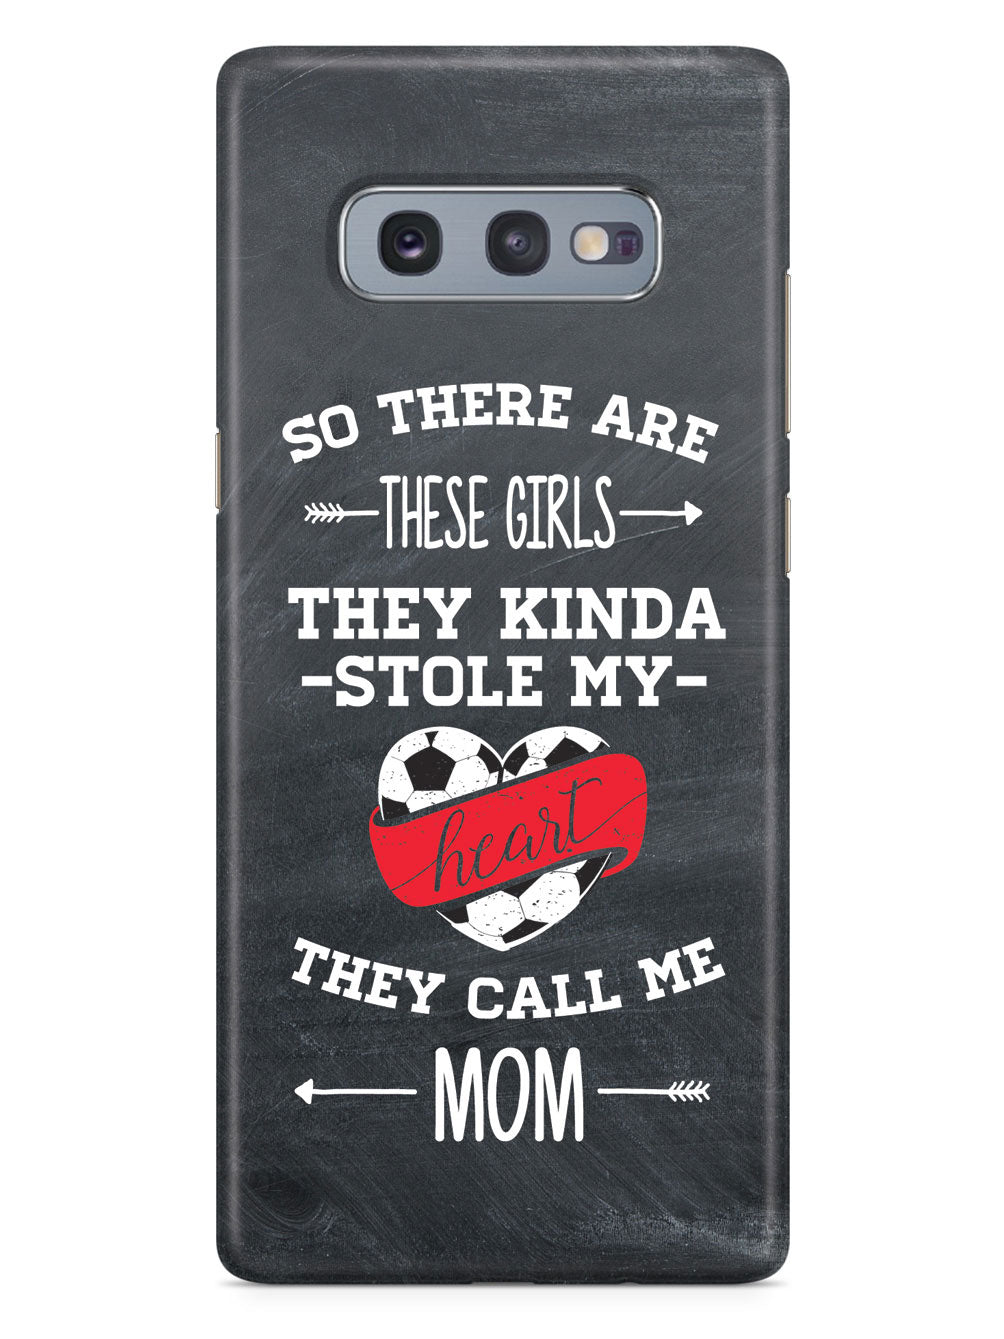 So There Are These Girls - Soccer Player - Mom Case